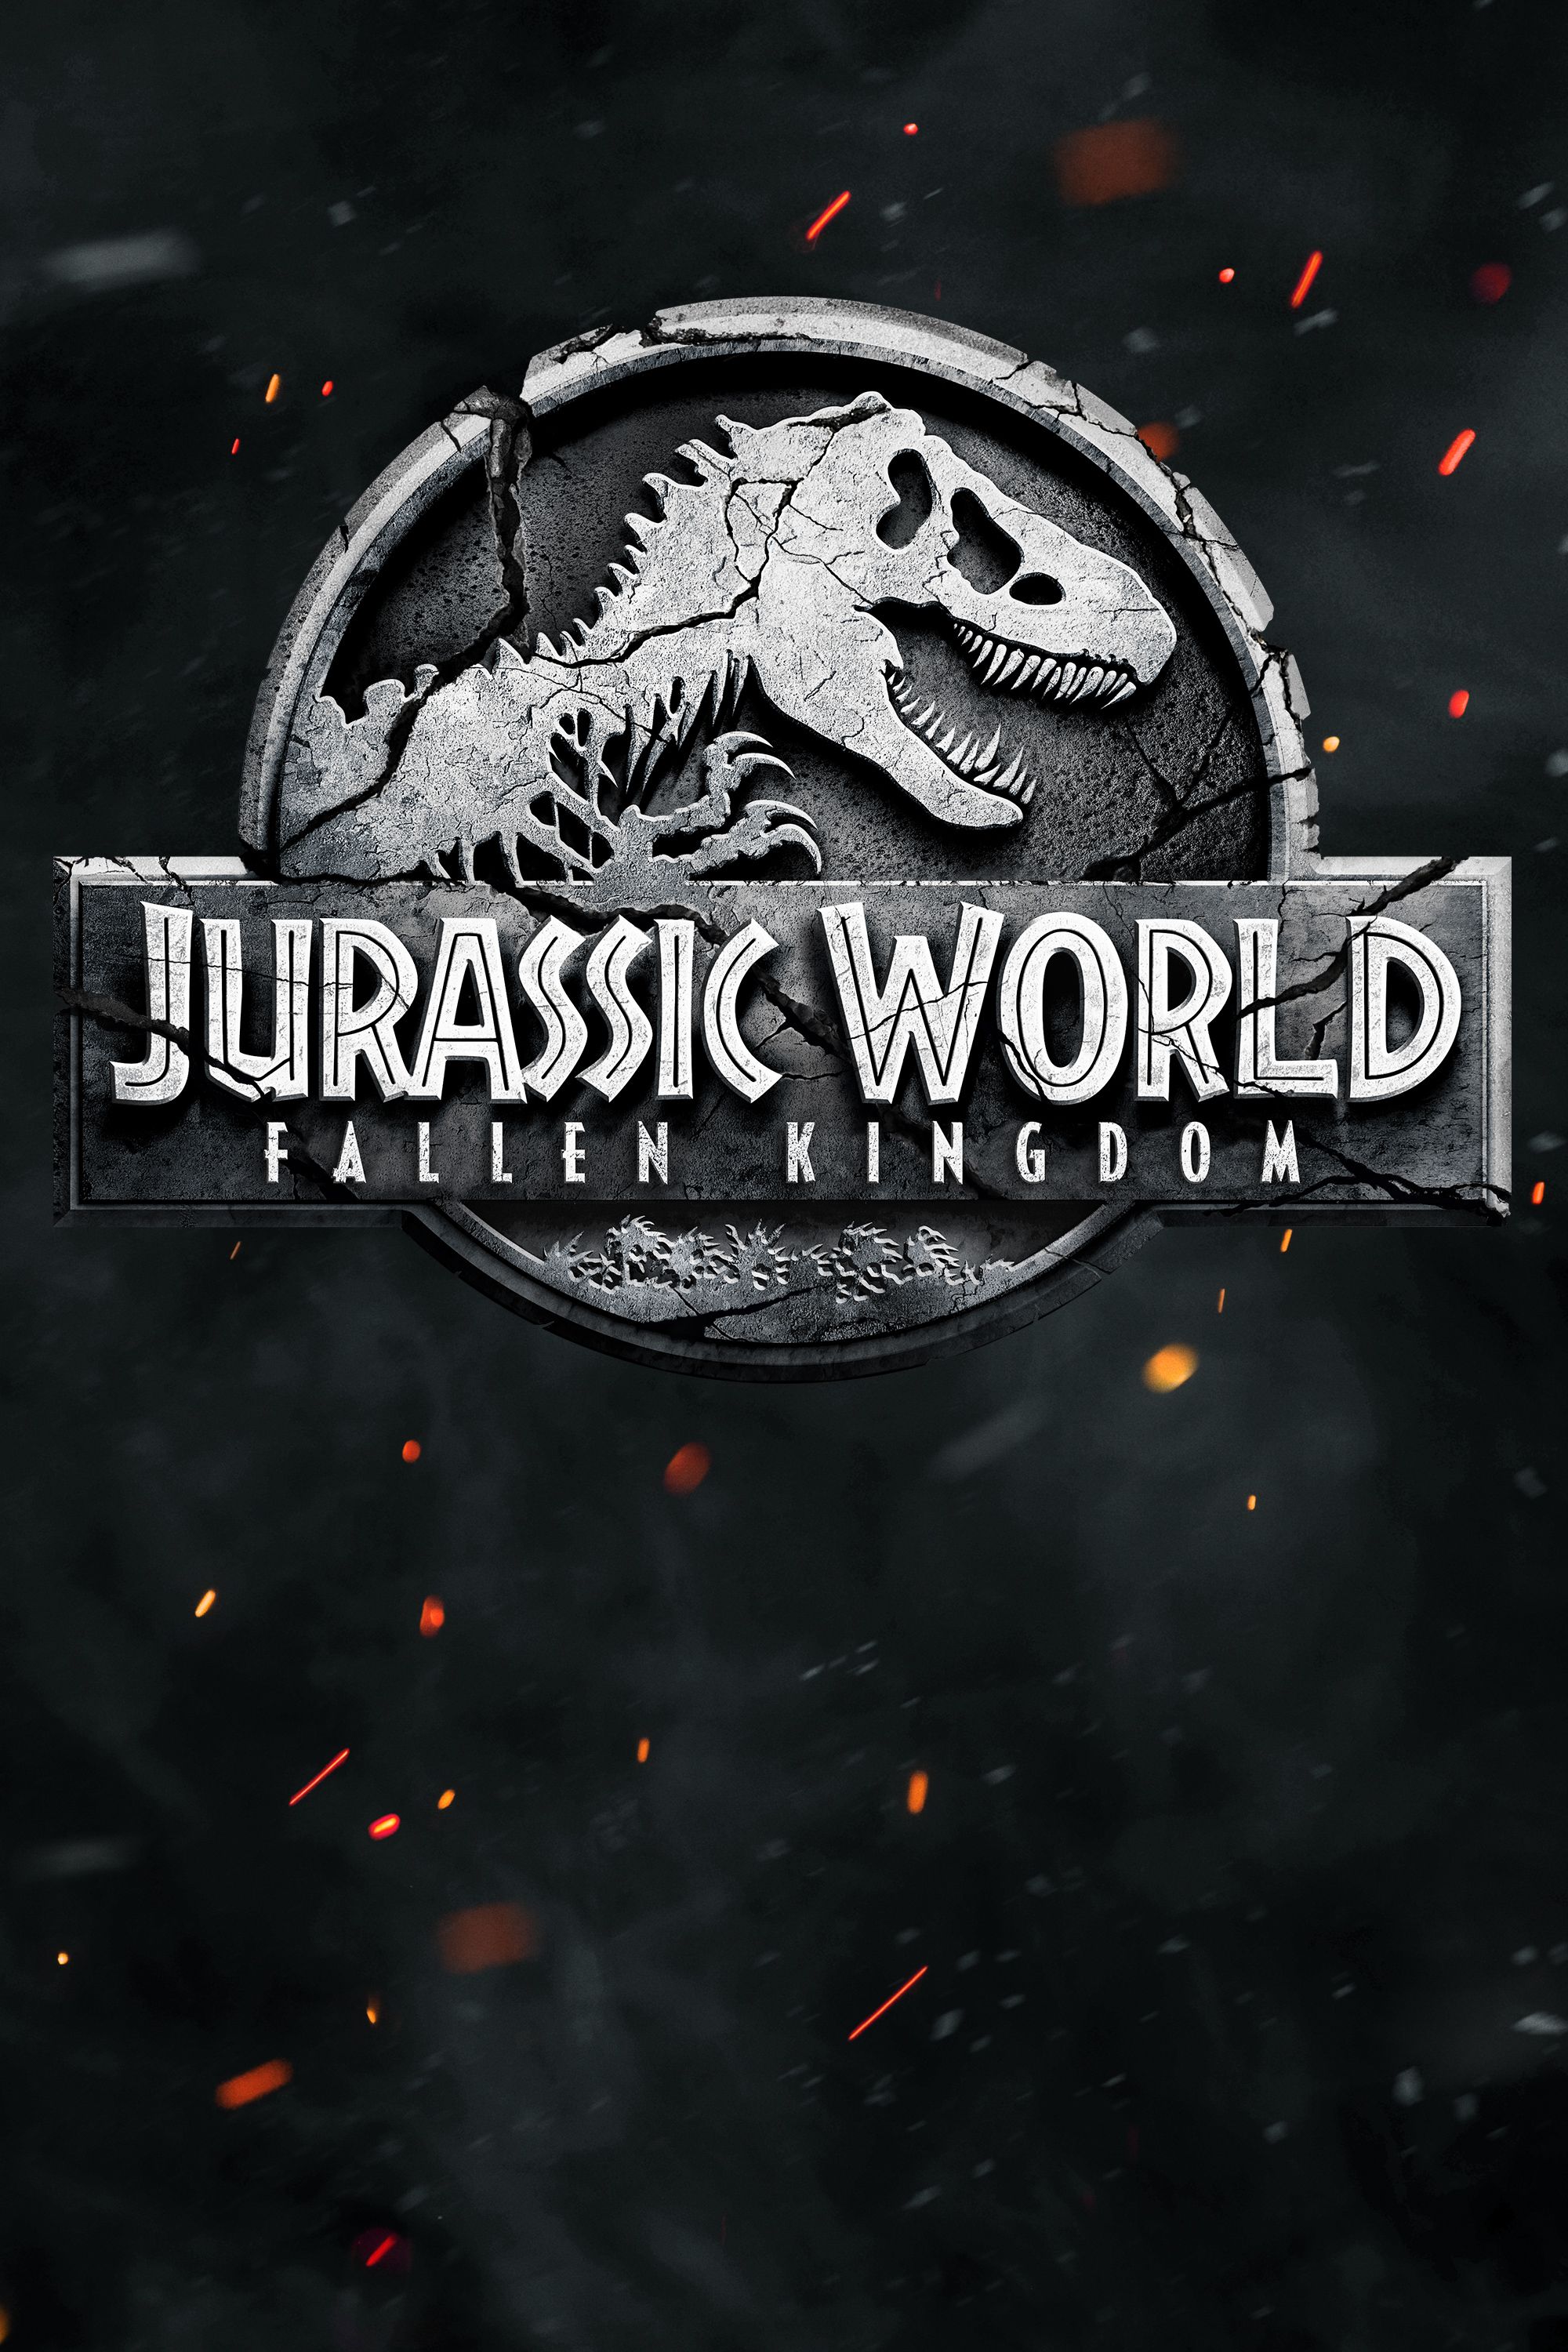 how to download jurassic world movie